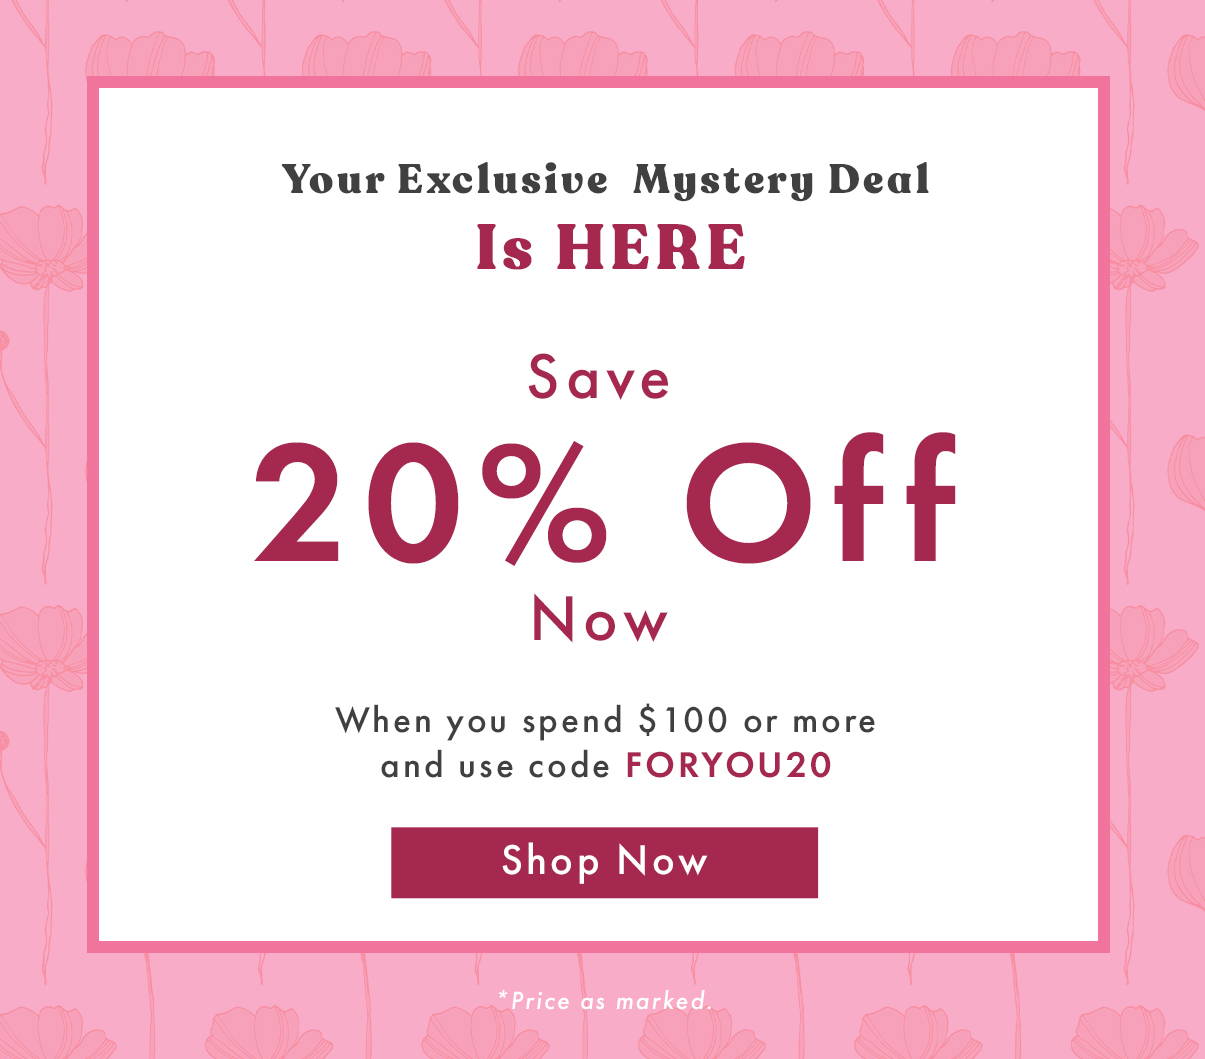 Your Exclusive Mystery Deal is Here. Save 20% Off Now When you spend $100 or more and use code FORYOU20.